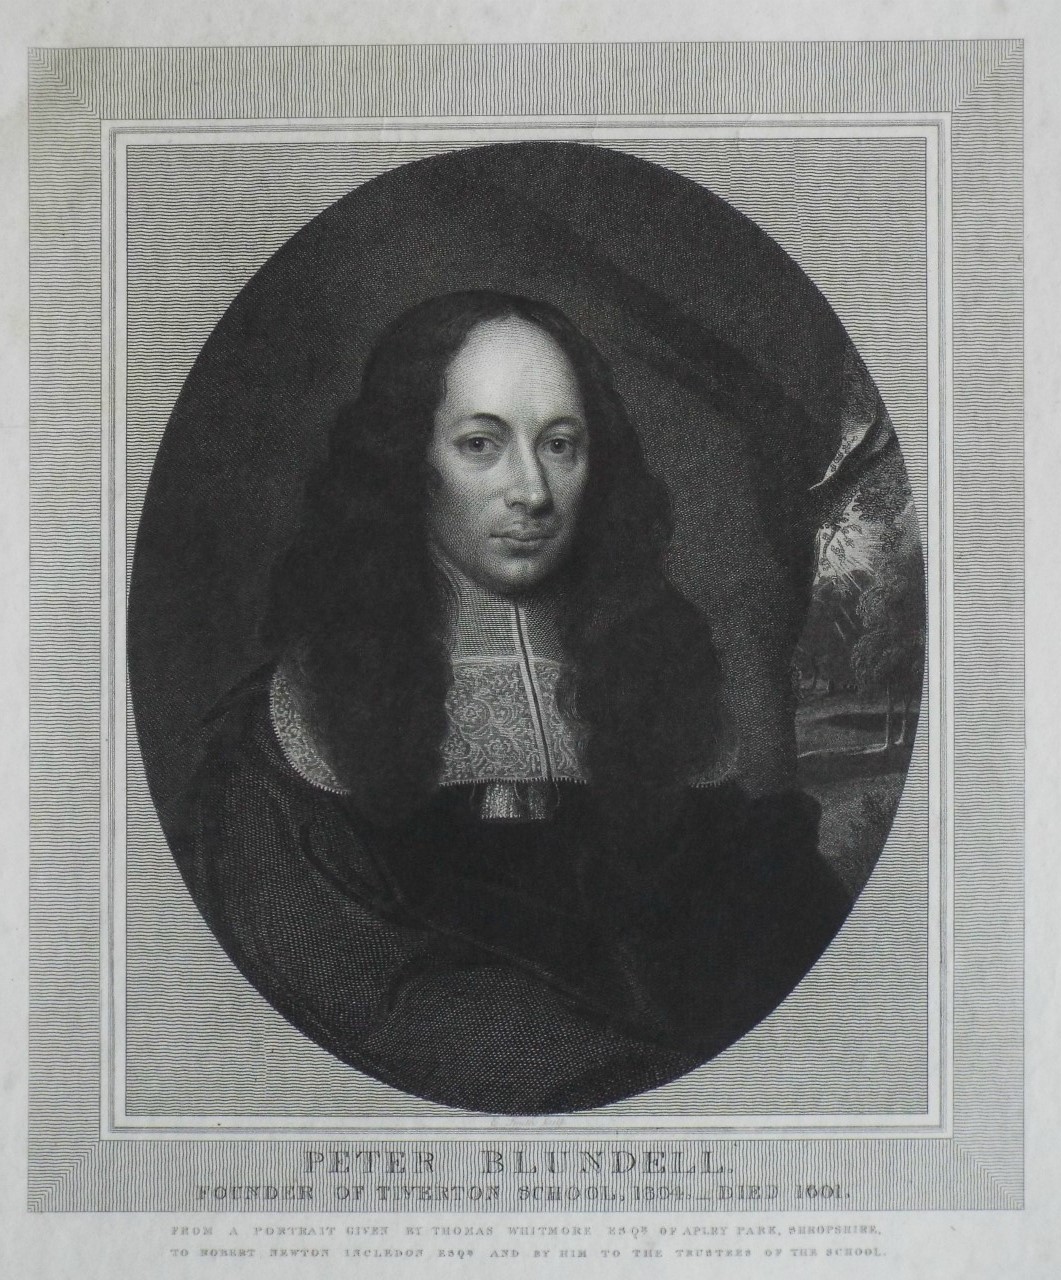 Print - Peter Blundell Founder of Tiverton School, 1604. Died 1601. From a portrait given by Thomas Whitmore Esqr. of Apley Park, Shropshire, to Robert Newton Incledon Esqr and by him to the Trustees of the School. - Smith